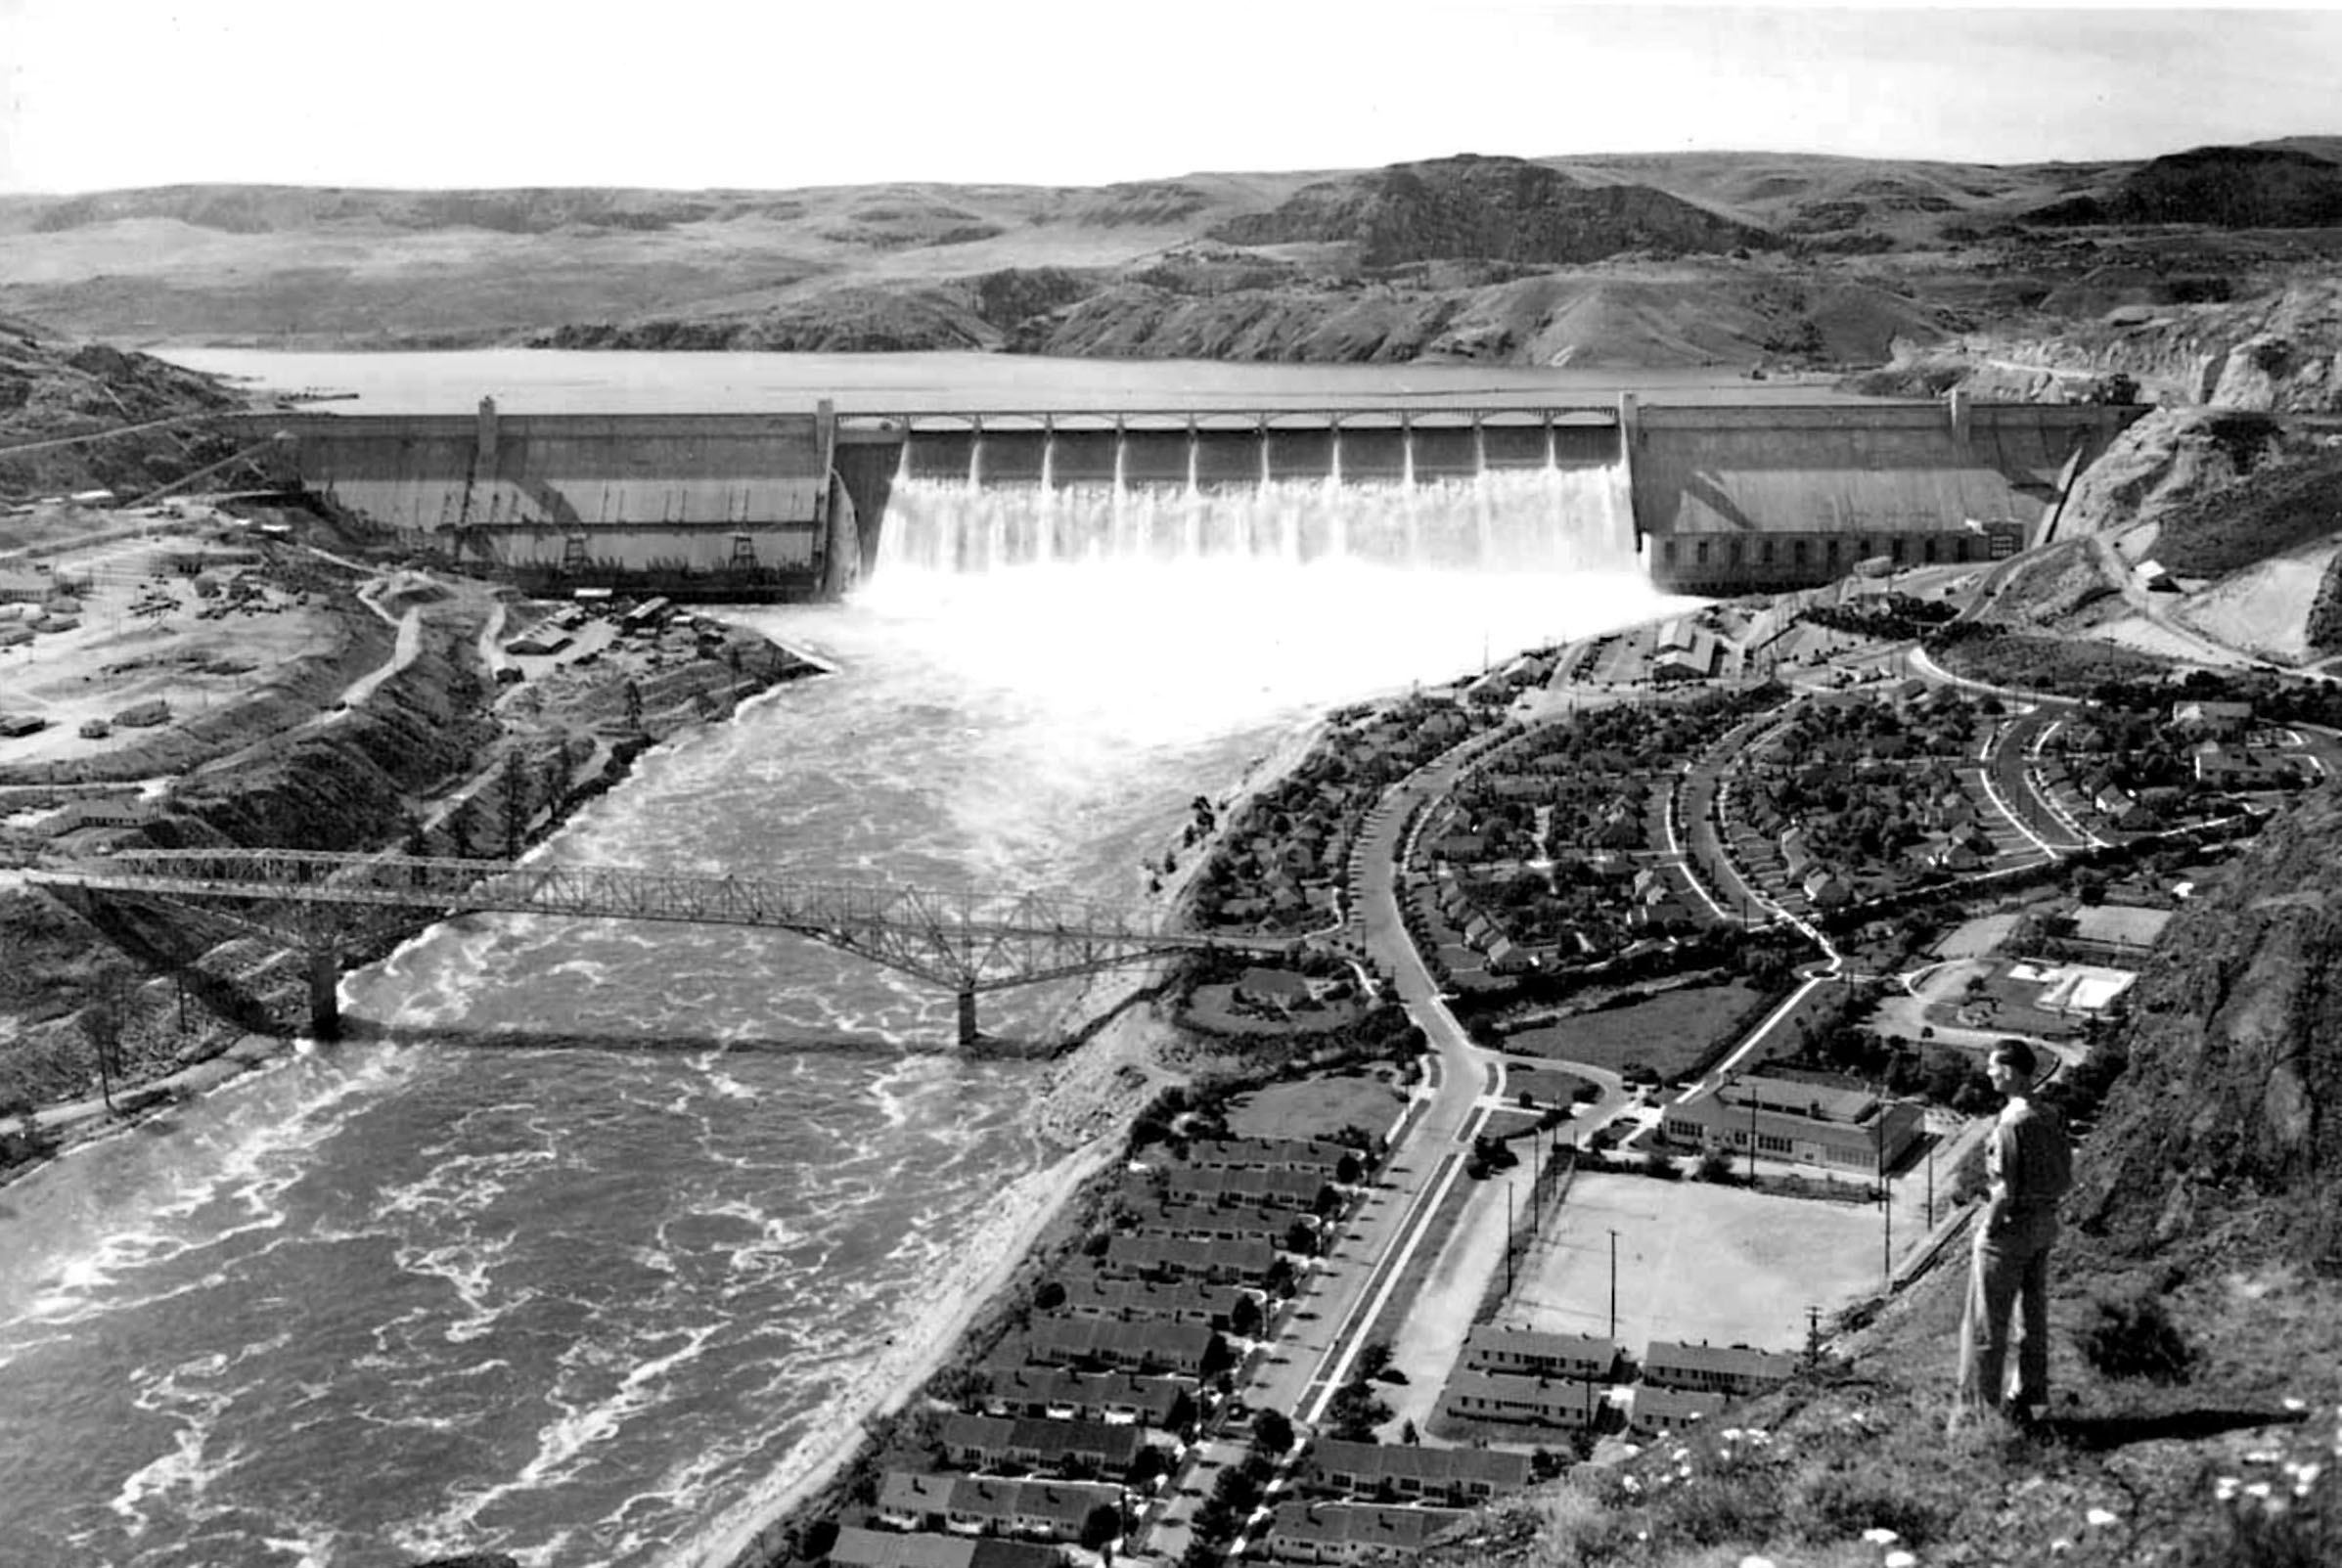 Photo taken June 22, 1942. View of the Grand Coulee Dam taken from the north cliffs below the dam.